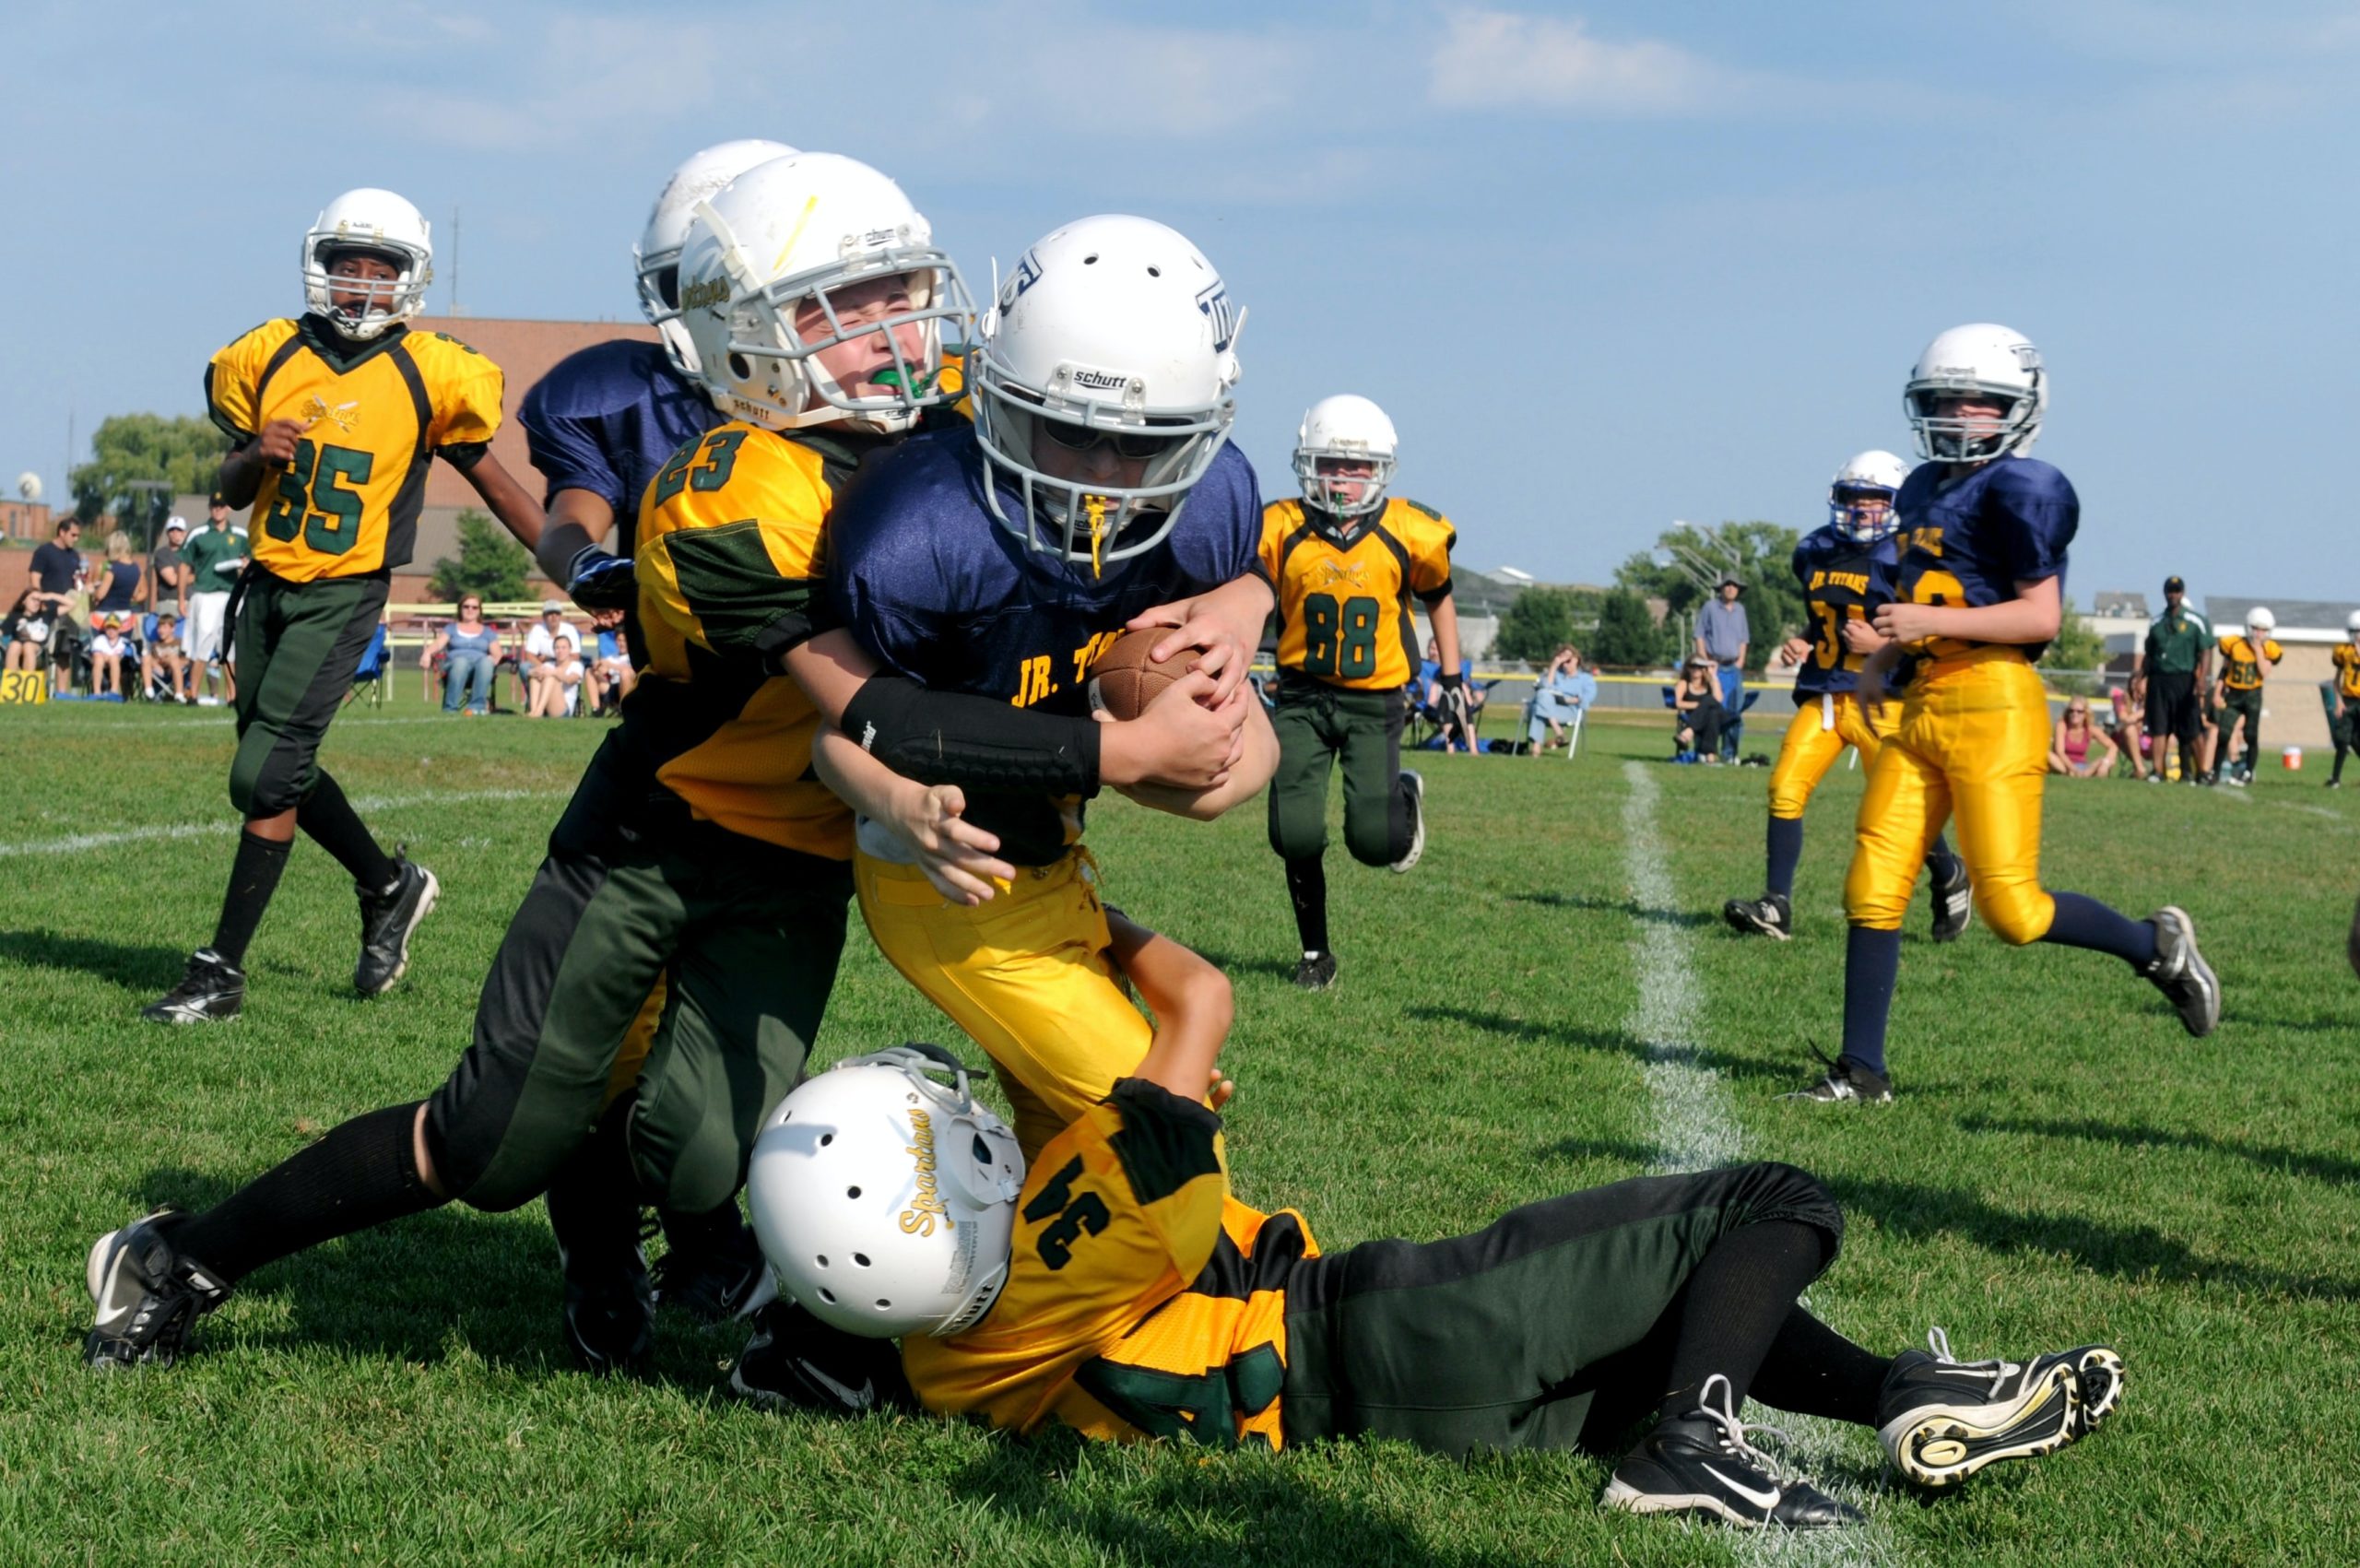 The benefits of massage therapy for young athletes aren’t limited to on-the-field growth and enhancements.